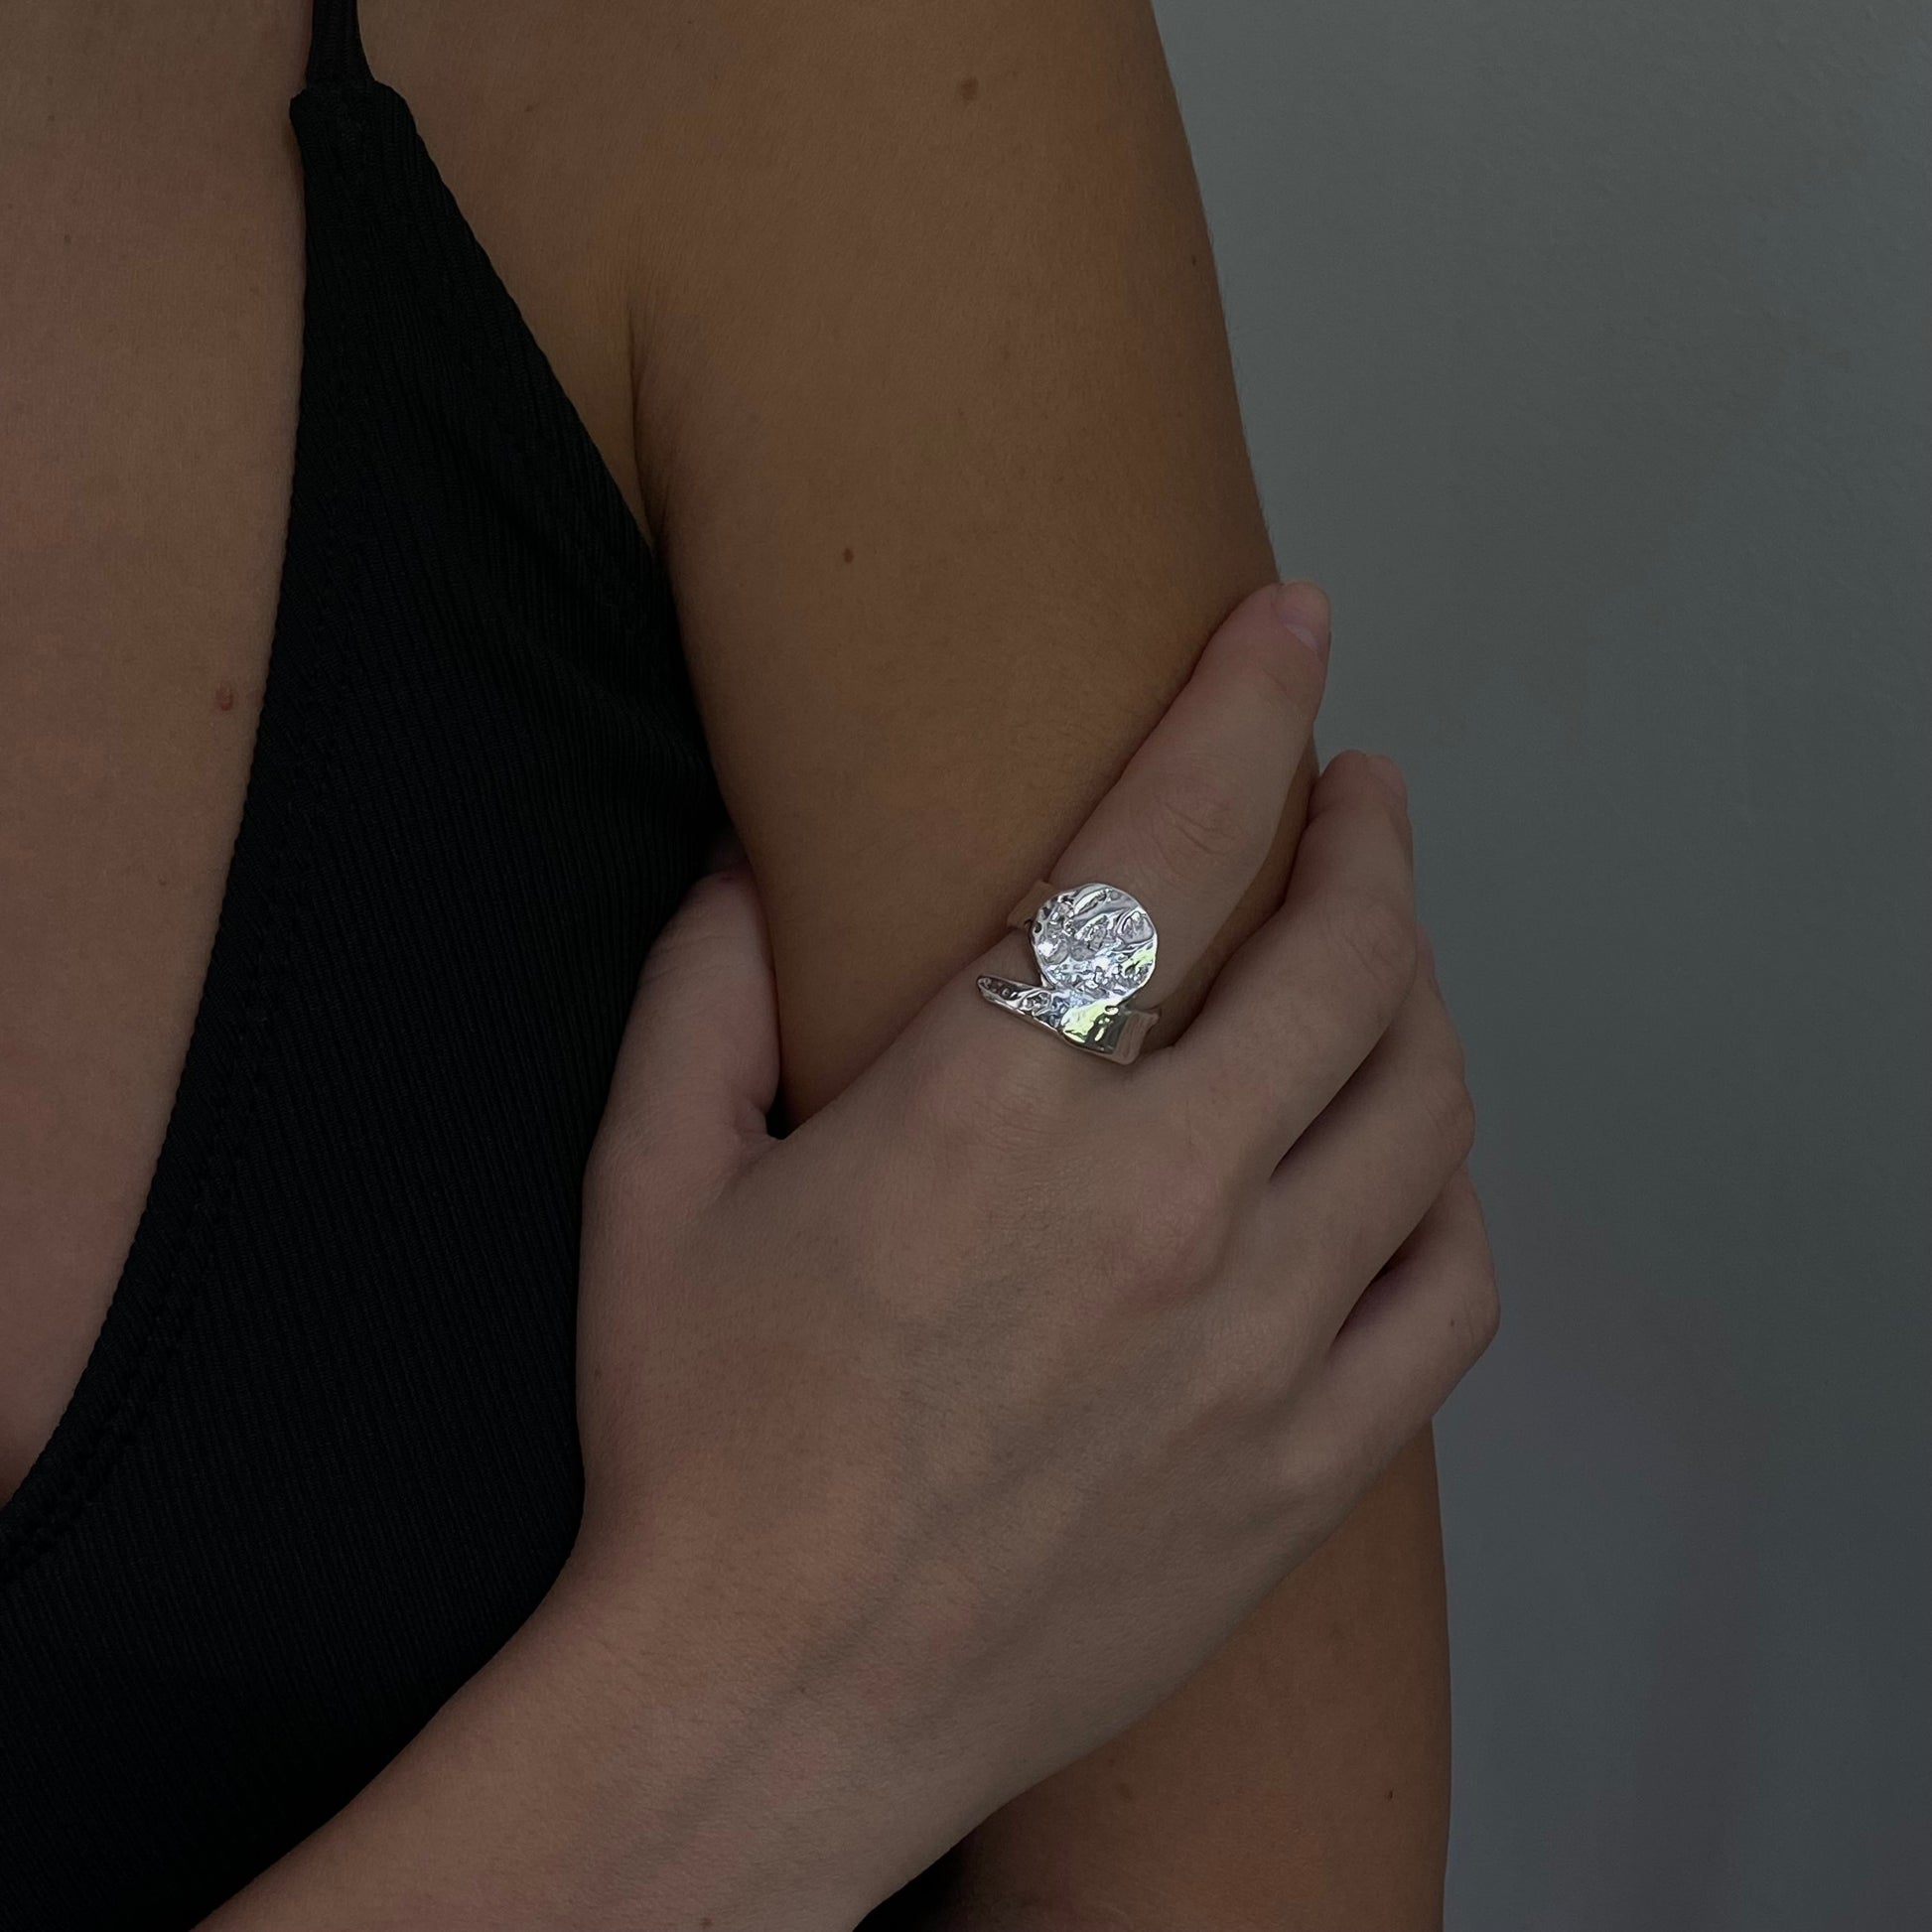 The Major ring is a handcrafted piece made of 925 sterling silver. Its surface is untreated and glossy